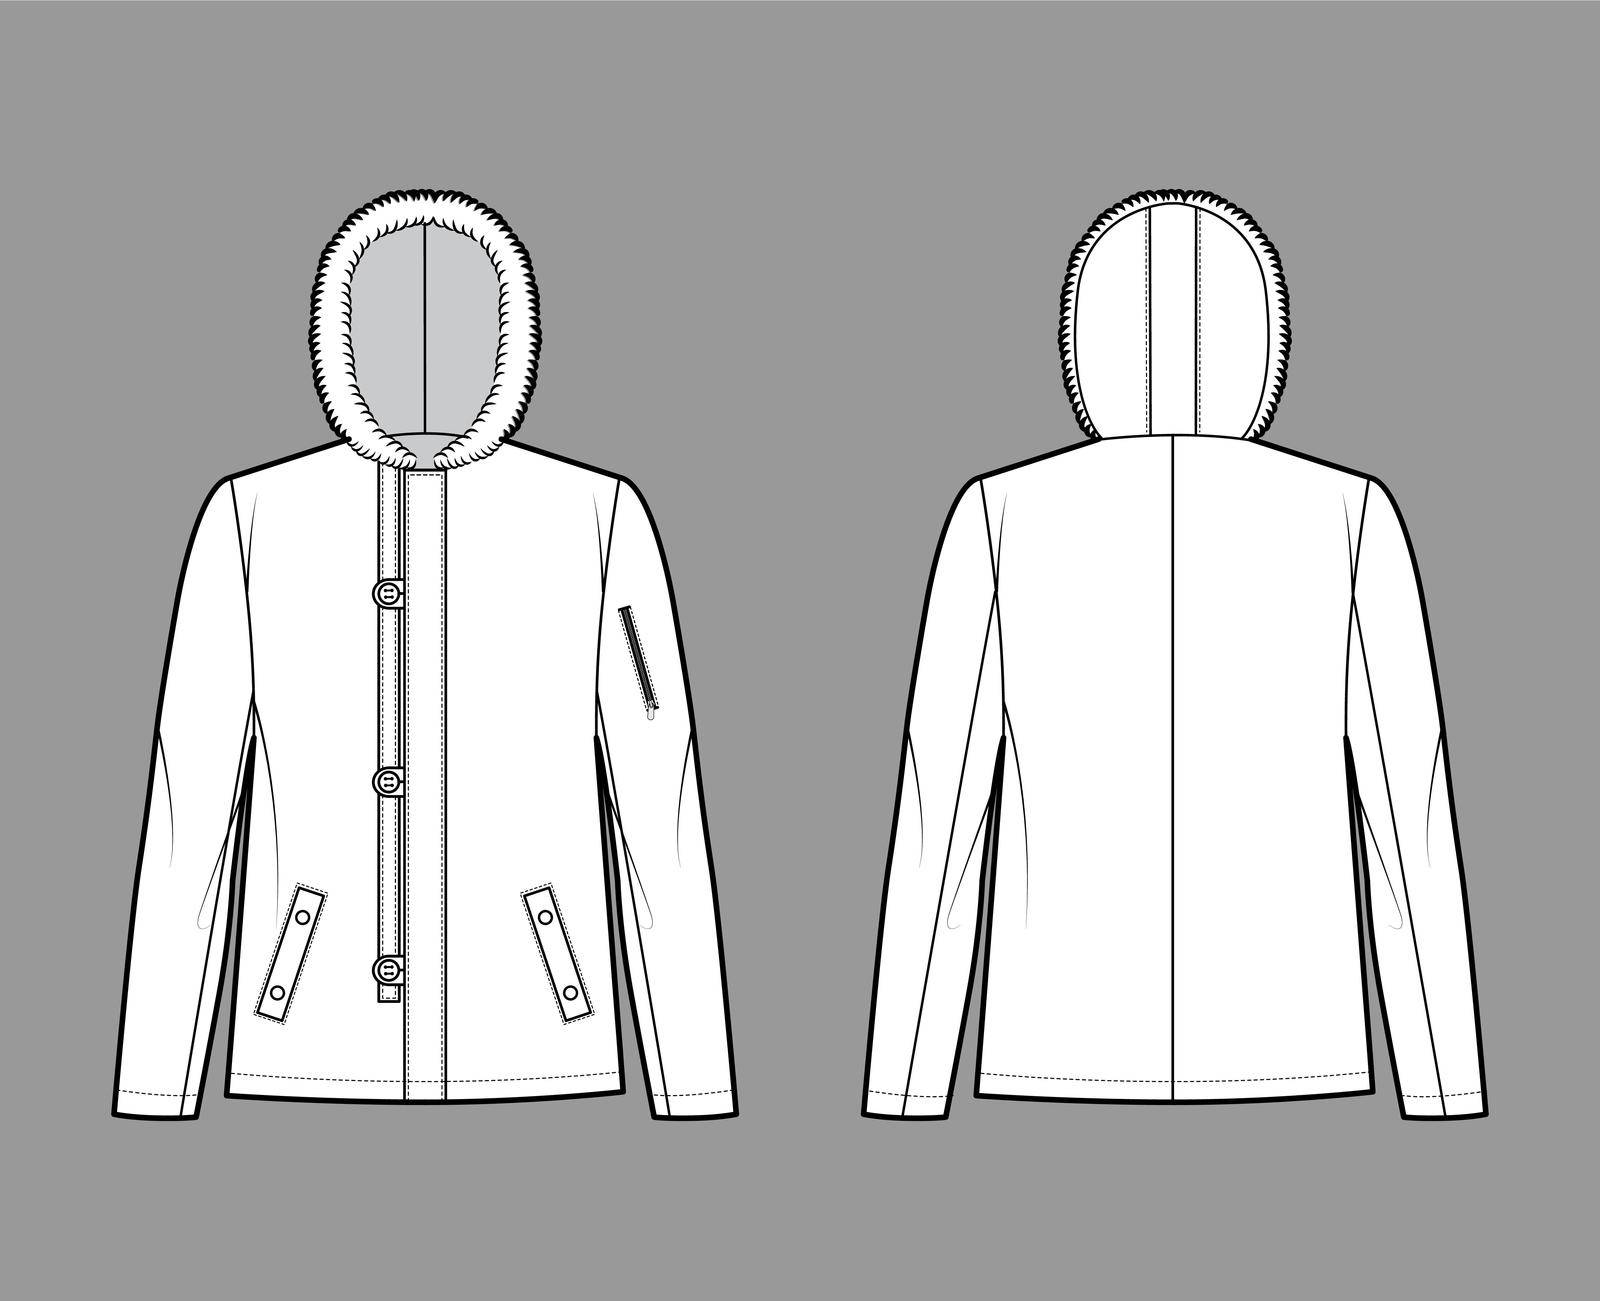 N-2B flight jacket technical fashion illustration with oversized, fur hood, long sleeves, flap pockets, button loop opening. Flat coat template front, back white color style. Women men top CAD mockup